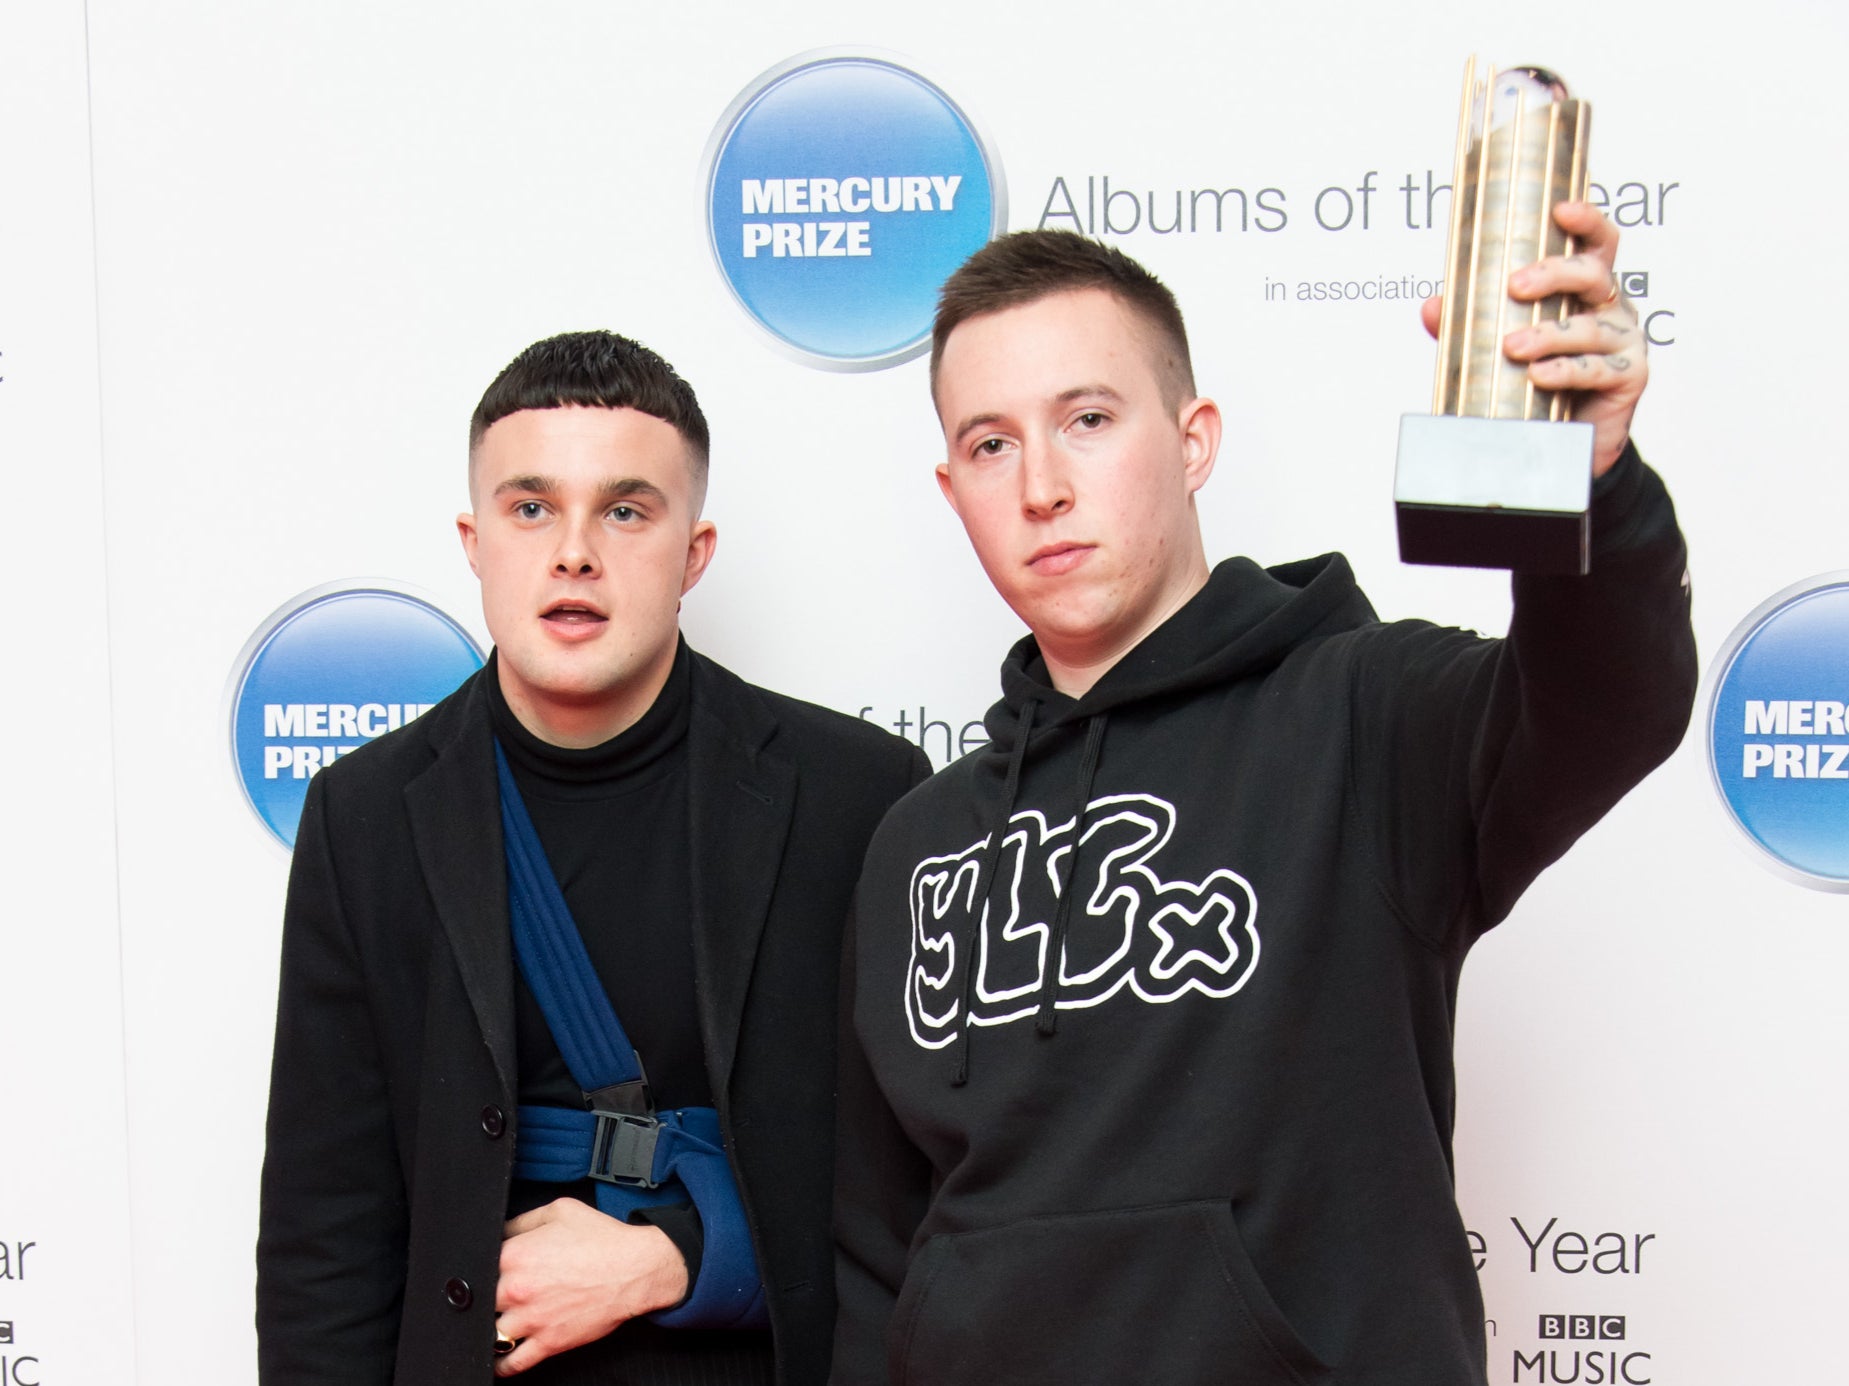 <p>British band Slaves, consisting of (L-R) Isaac Holman and Laurie Vincent attend the Mercury Music Prize at BBC Broadcasting House on November 20, 2015 in London, England. (Photo by Ian Gavan/Getty Images)</p>